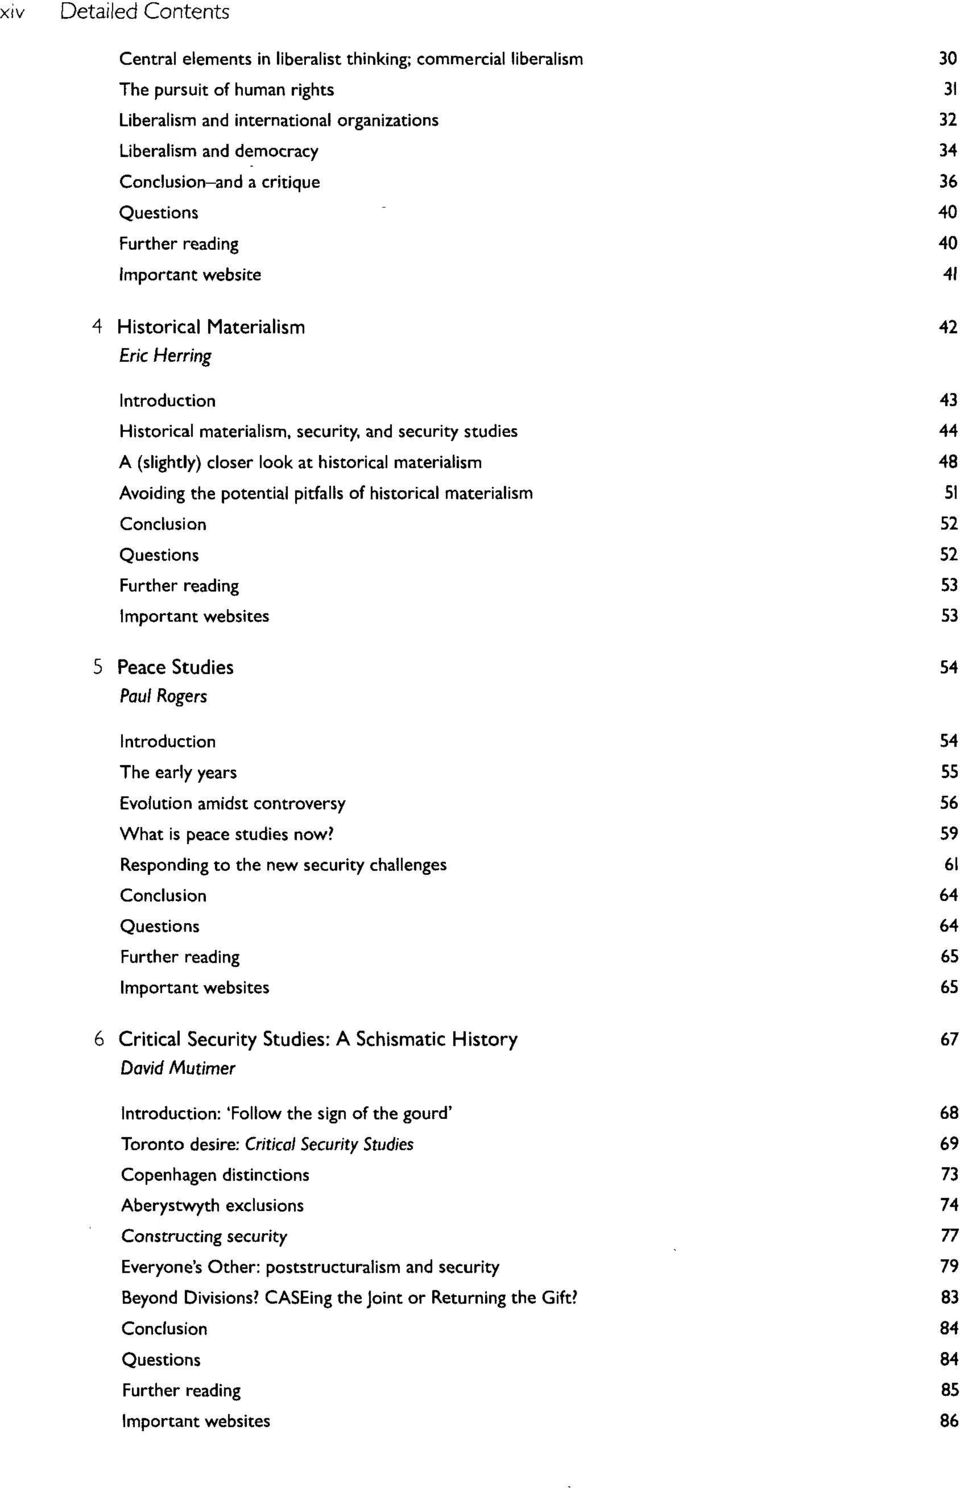 (slightly) closer look at historical materialism 48 Avoiding the potential pitfalls of historical materialism SI Conclusion 52 Questions 52 Further reading 53 Important websites S3 5 Peace Studies 54